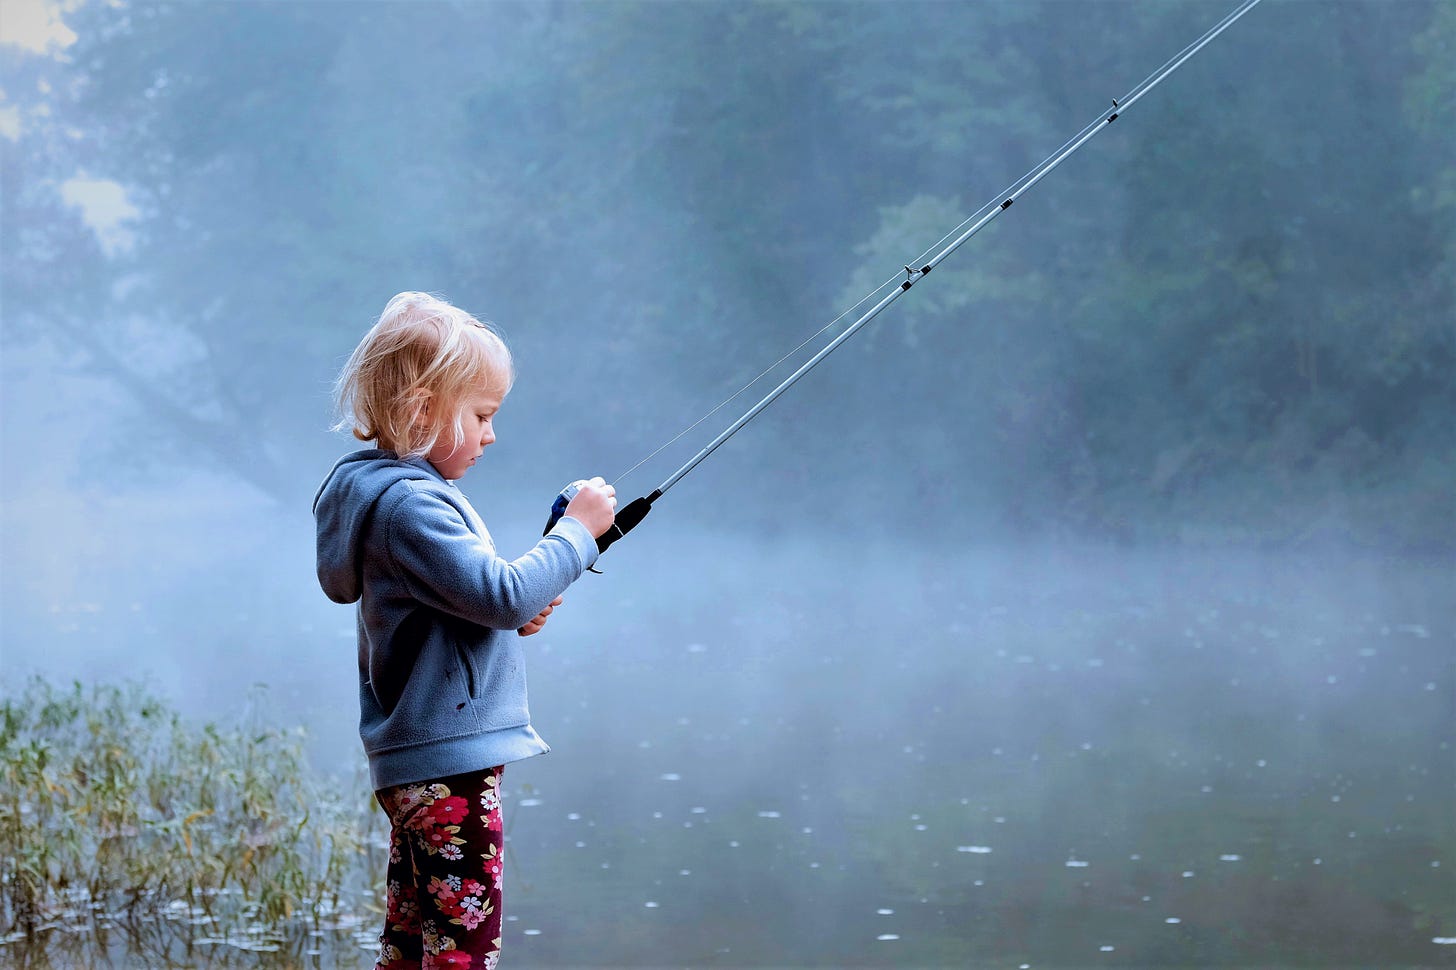 Young girl with blonde hair wearing blue sweatshirt fishing with rod and reel on quiet lake